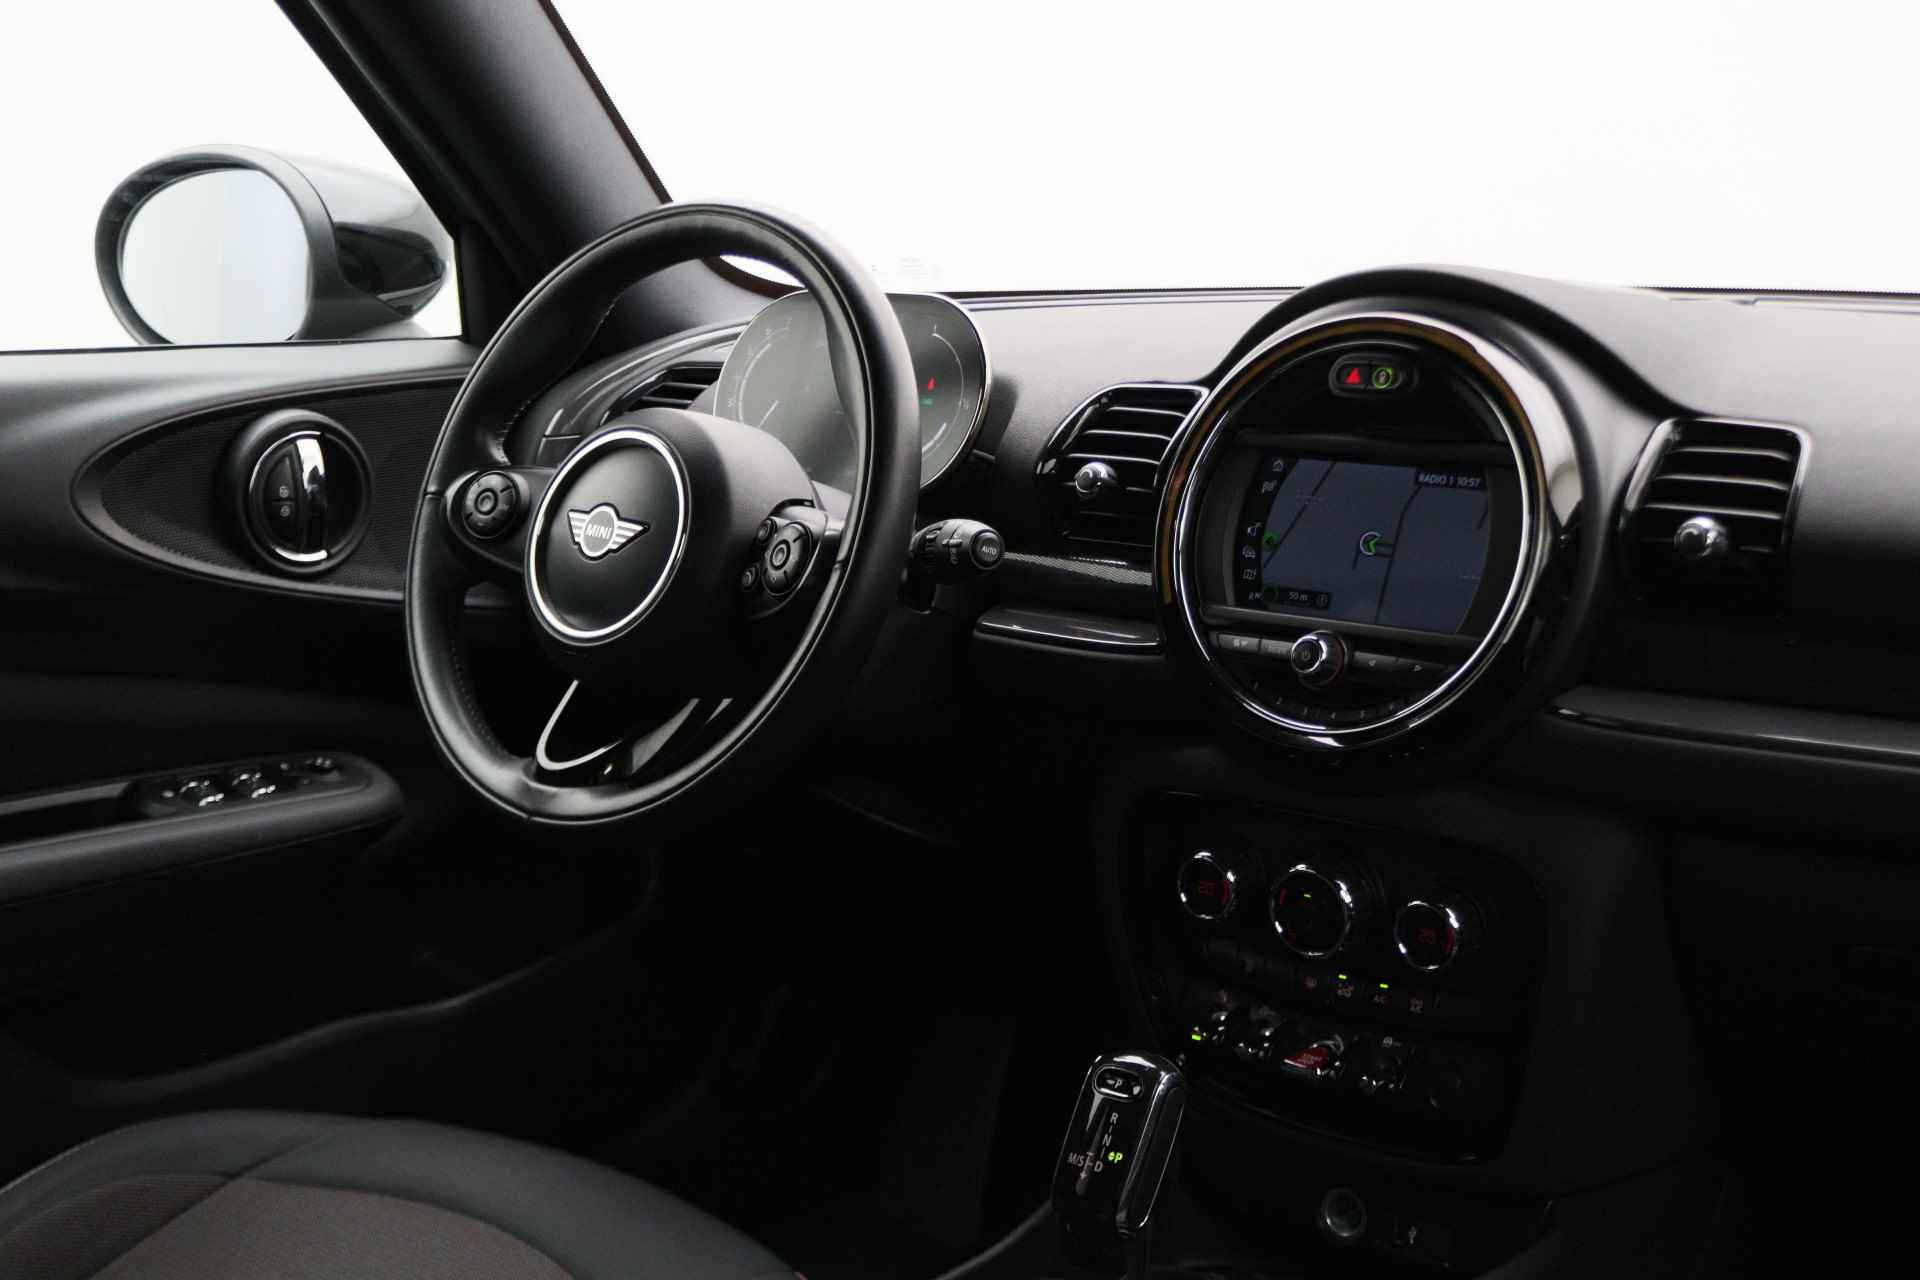 MINI Clubman 1.5 Cooper Business Edition Automaat LED, Keyless, Two-Tone lak, Navigatie, Cruise, PDC, Climate, 17” - 25/44